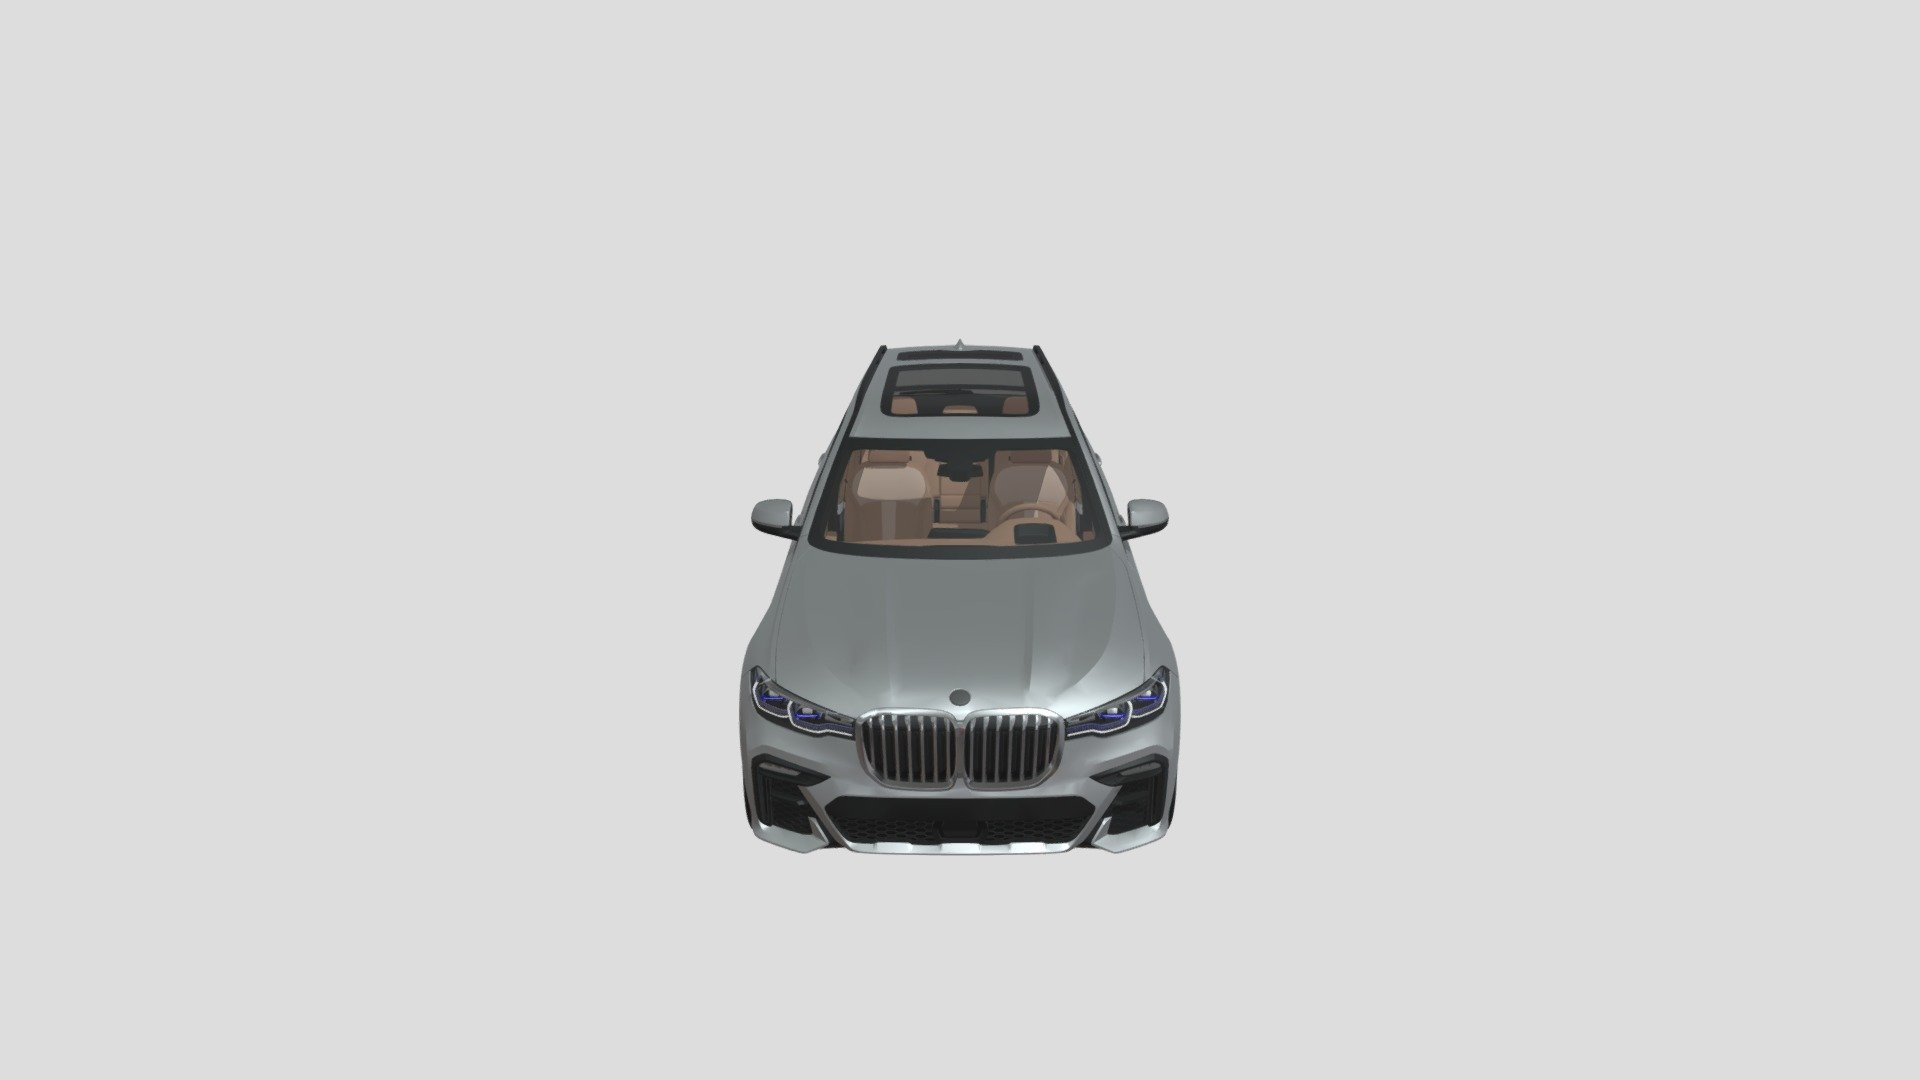 This is a BMW X7, a big family SUV. It is high detail and high poly with a complete interior finish. If u are interested in buying the model please DM Nay#7971 on discord 3d model